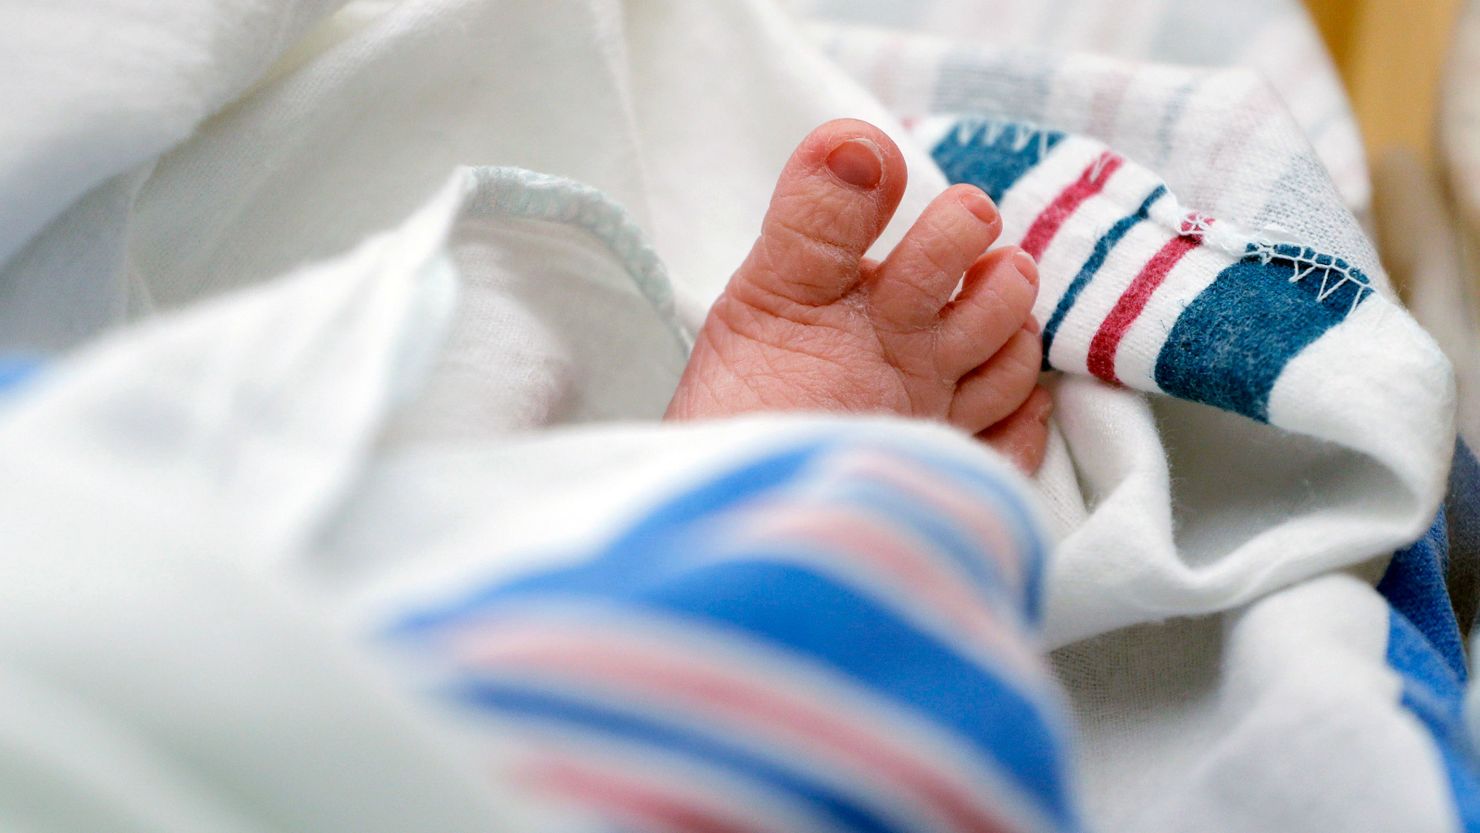 The toes of a baby are seen DHR Health, in July 2020 in McAllen, Texas.